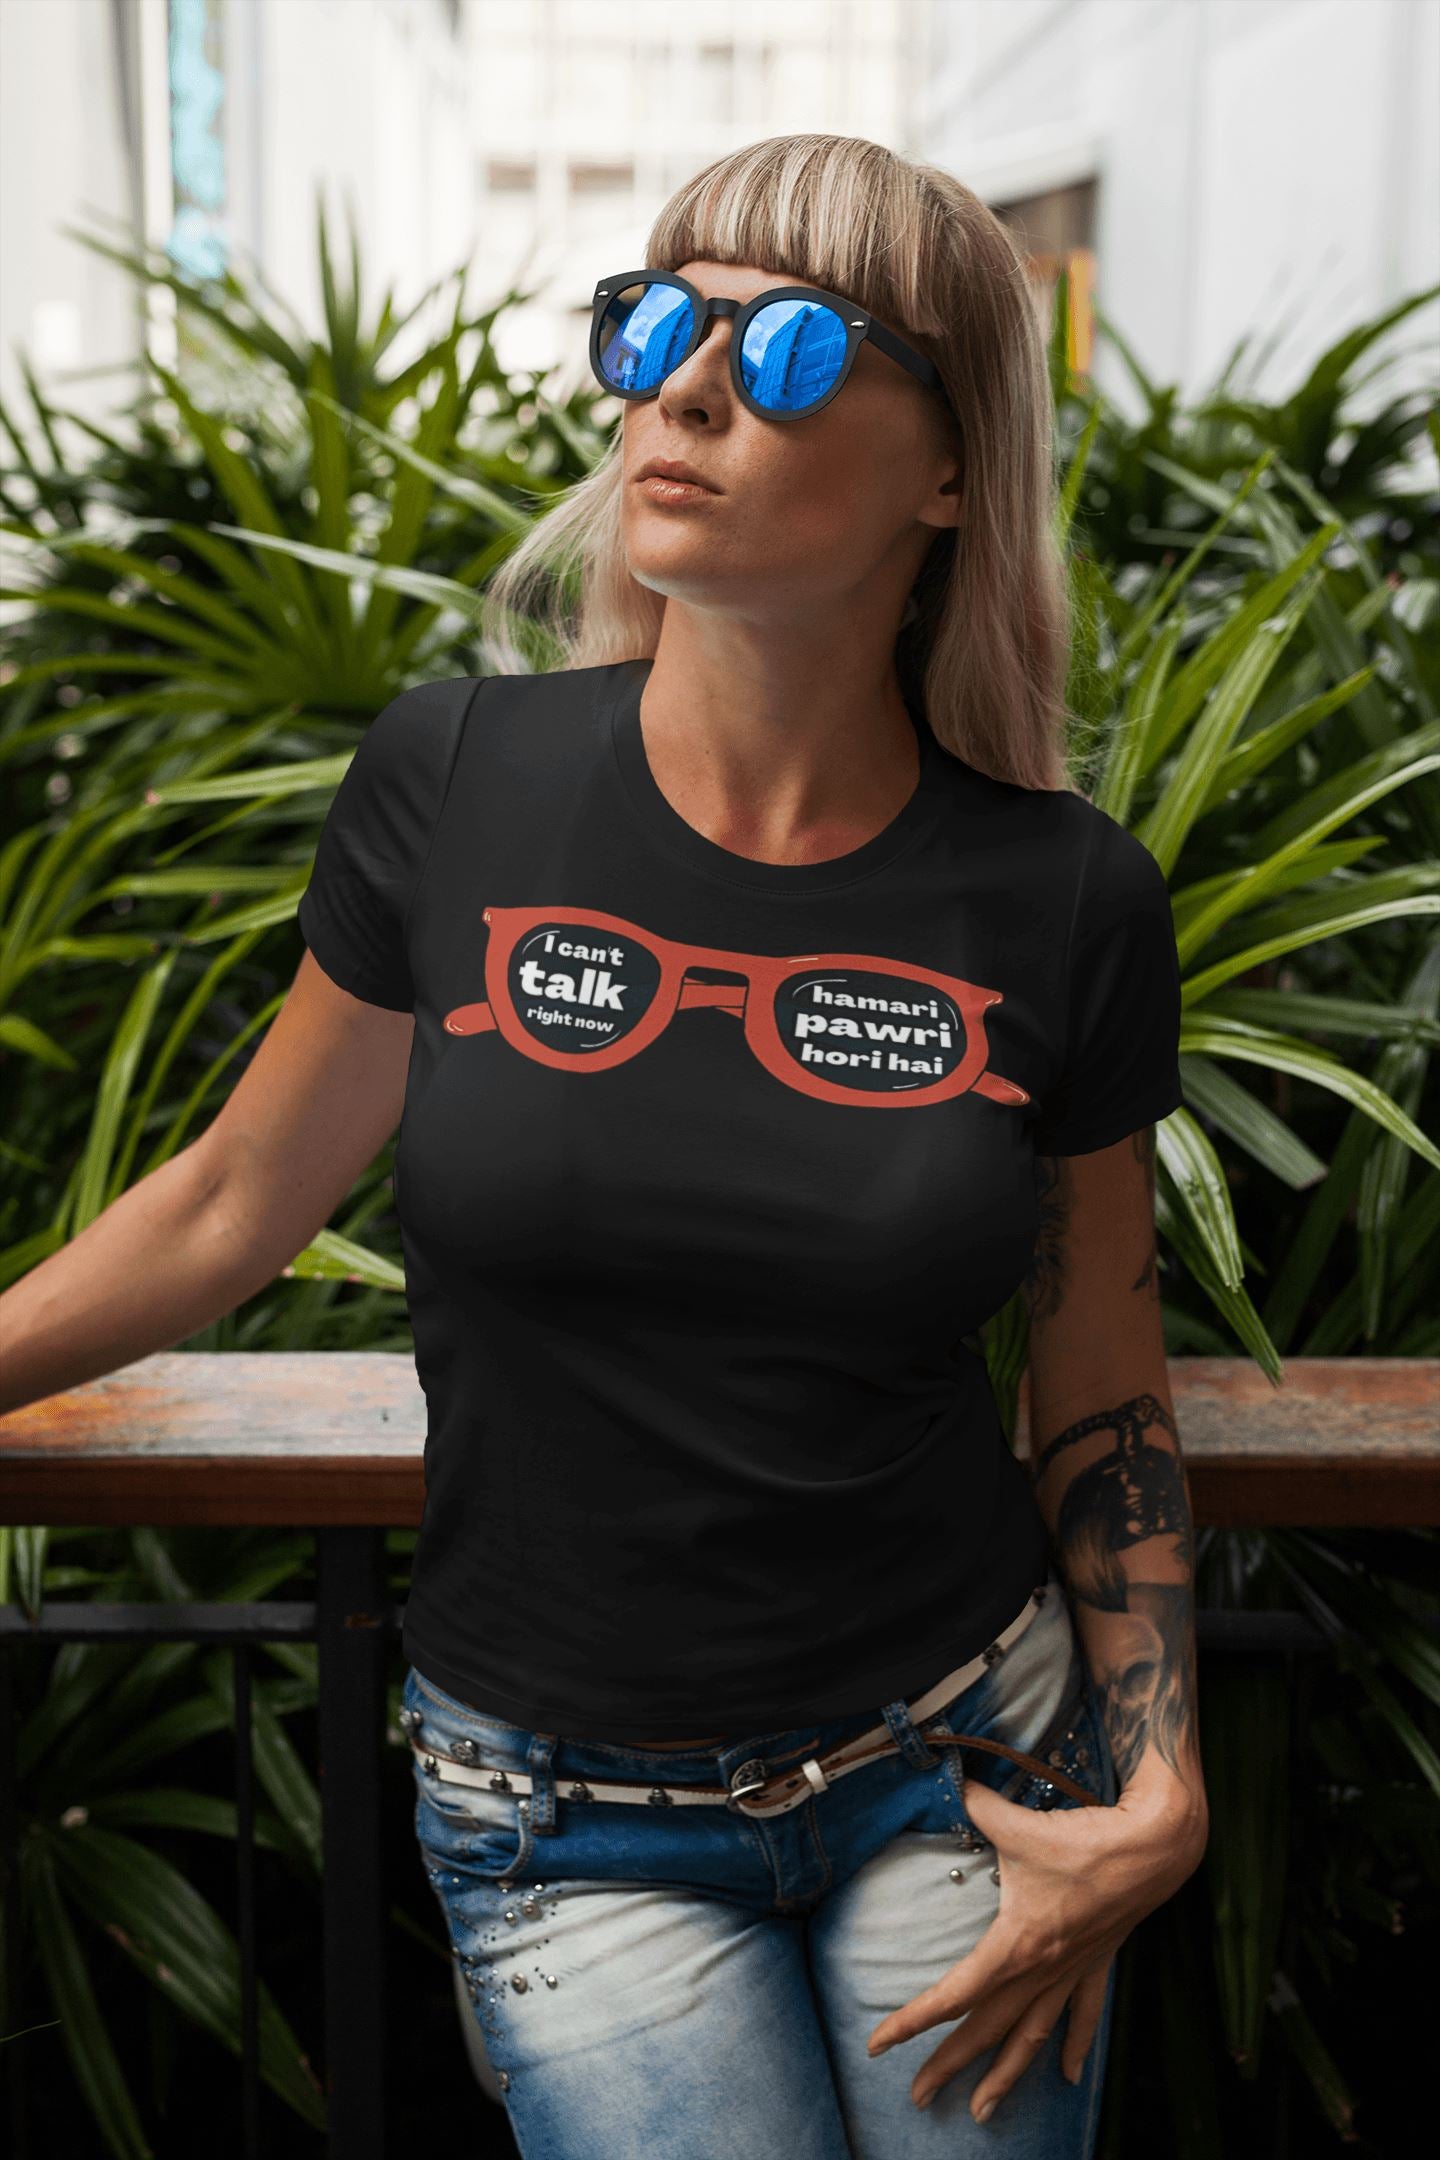 I Can't Talk Because Hamari Party Ho Rahi Hai Funny Unisex T Shirt | Premium Design | Catch My Drift India - Catch My Drift India  black, clothing, female, funny, general, made in india, shir